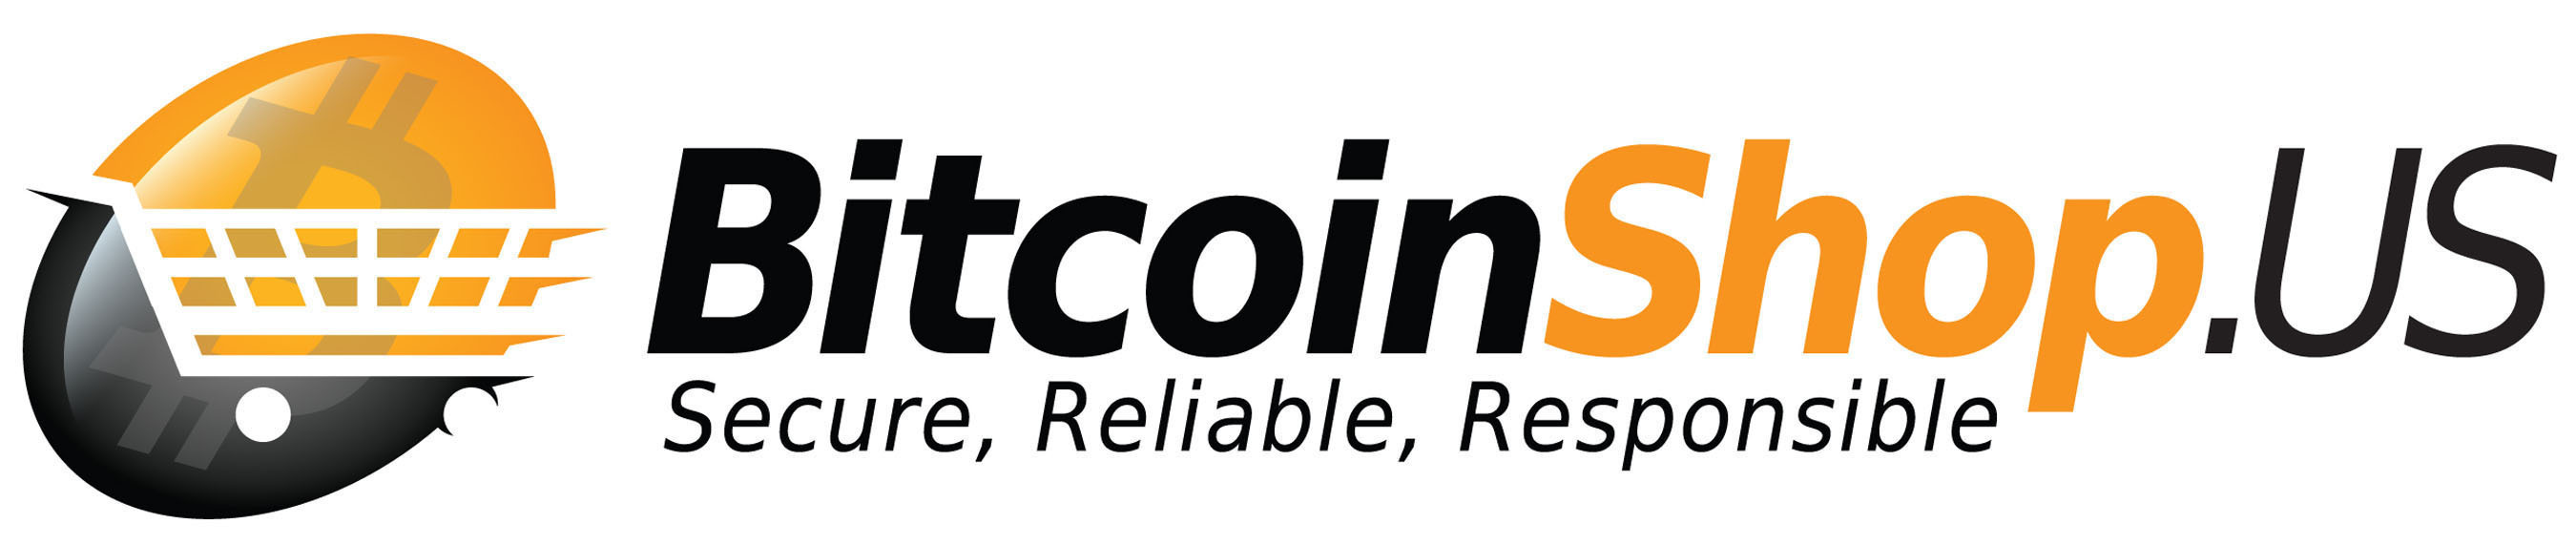 Bitcoin Shop, Inc. - First Publicly Traded Company with 'Bitcoin' in Its Name.(PRNewsFoto/Bitcoin Shop, Inc.) (PRNewsFoto/BITCOIN SHOP, INC.)